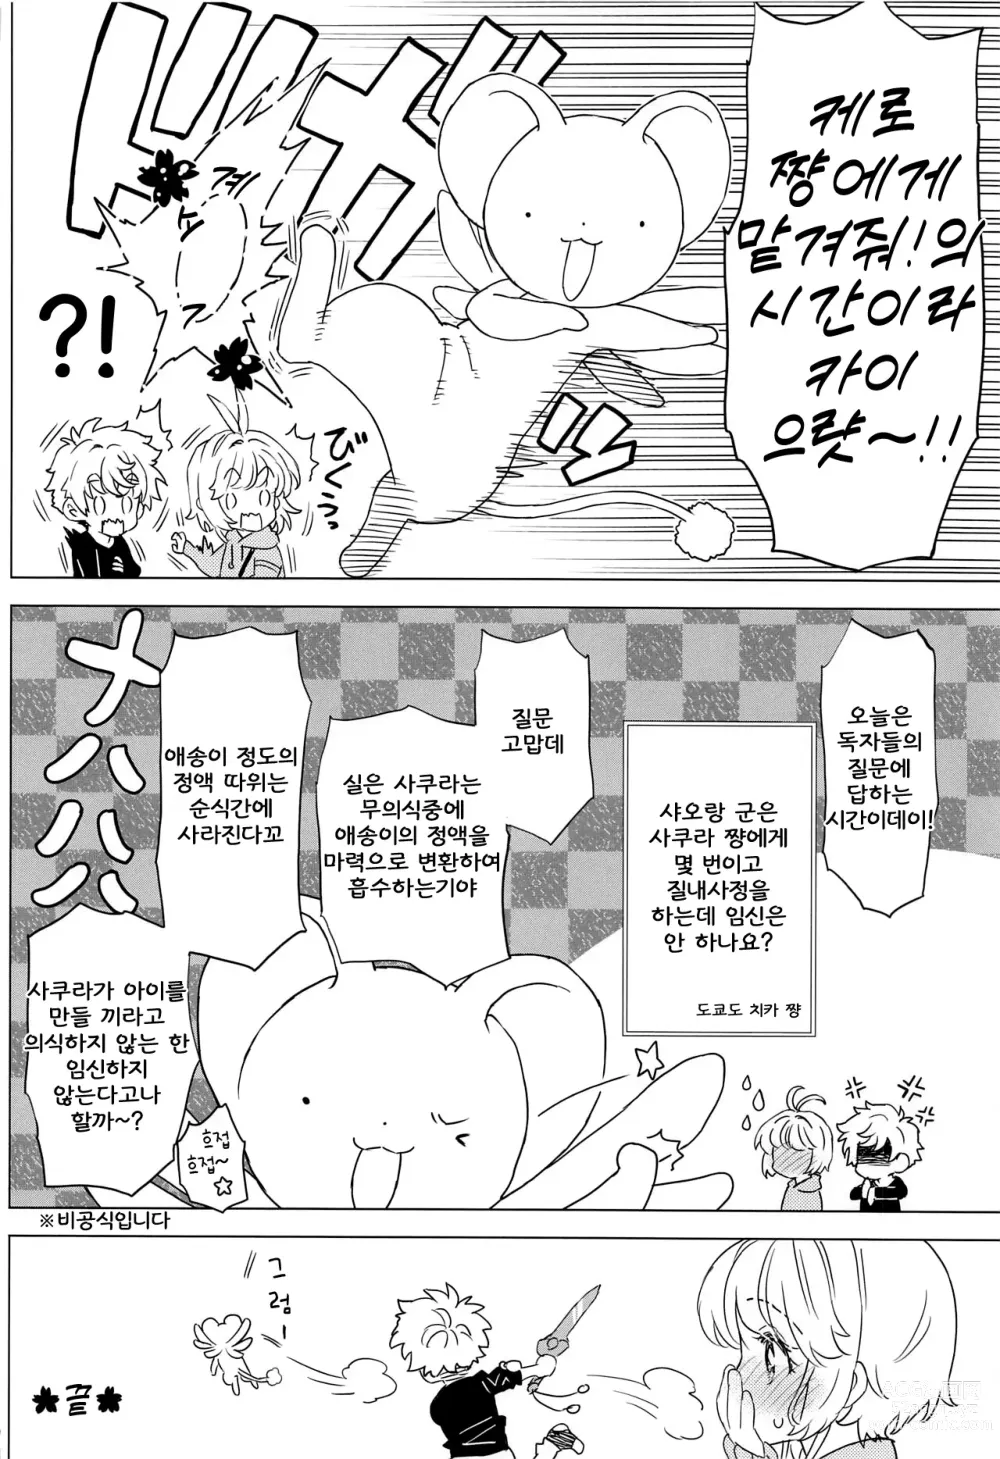 Page 27 of doujinshi 사쿠라와 샤오랑의 집 데이트